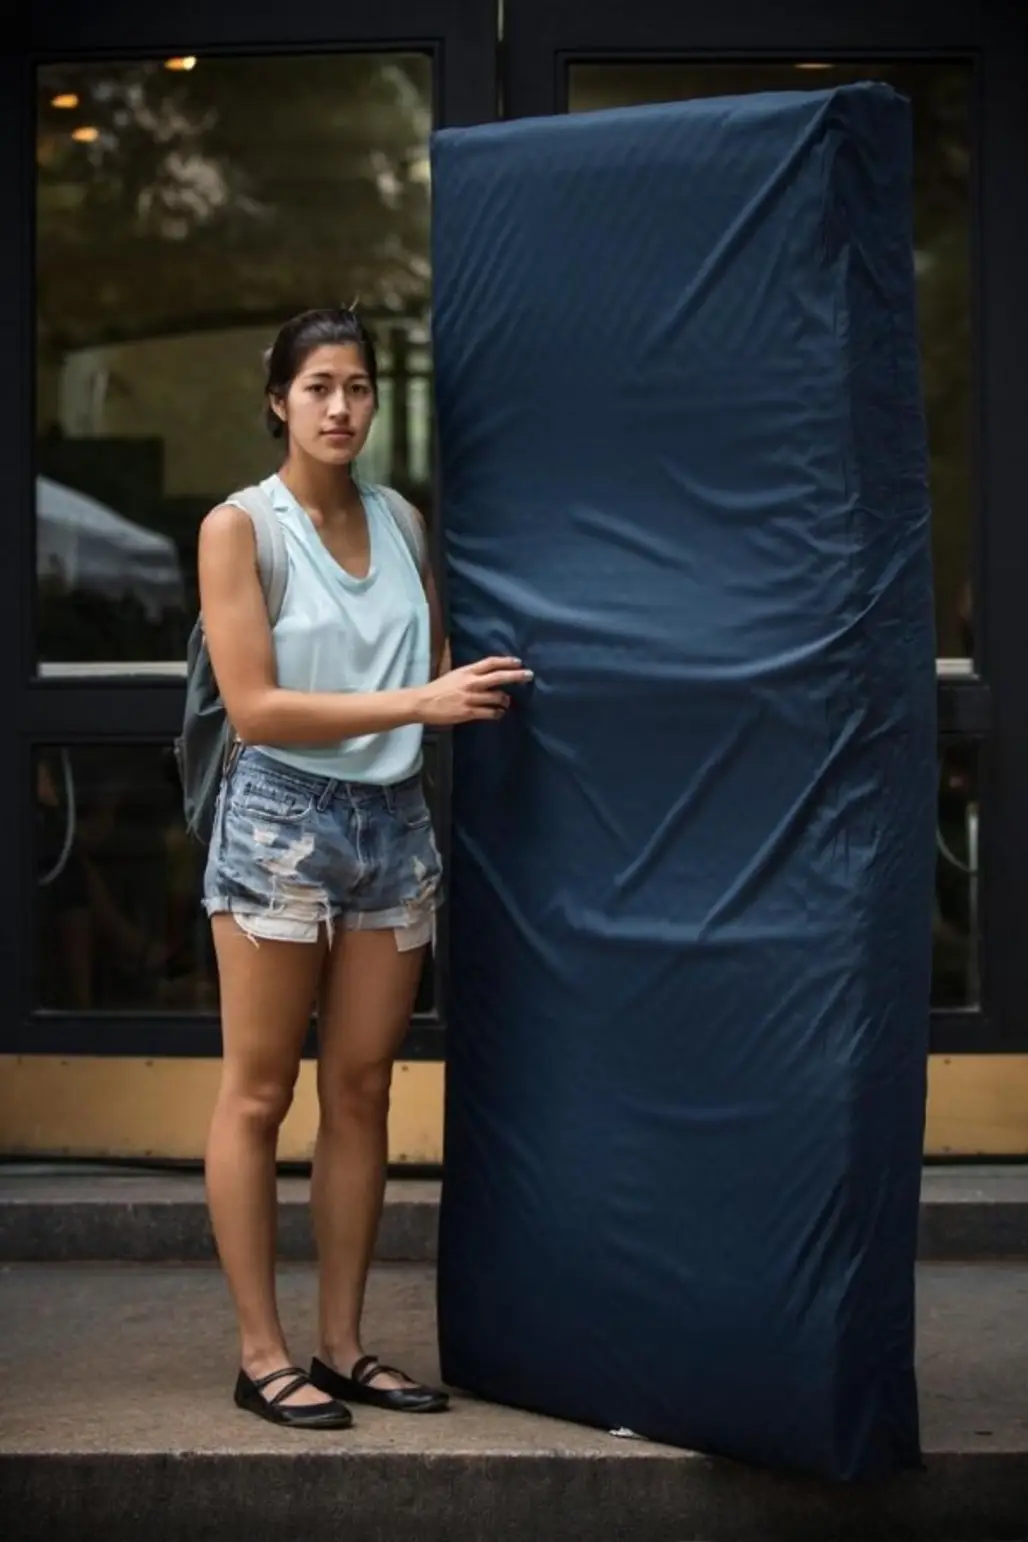 Emma Sulkowicz's "Carry That Weight" Project